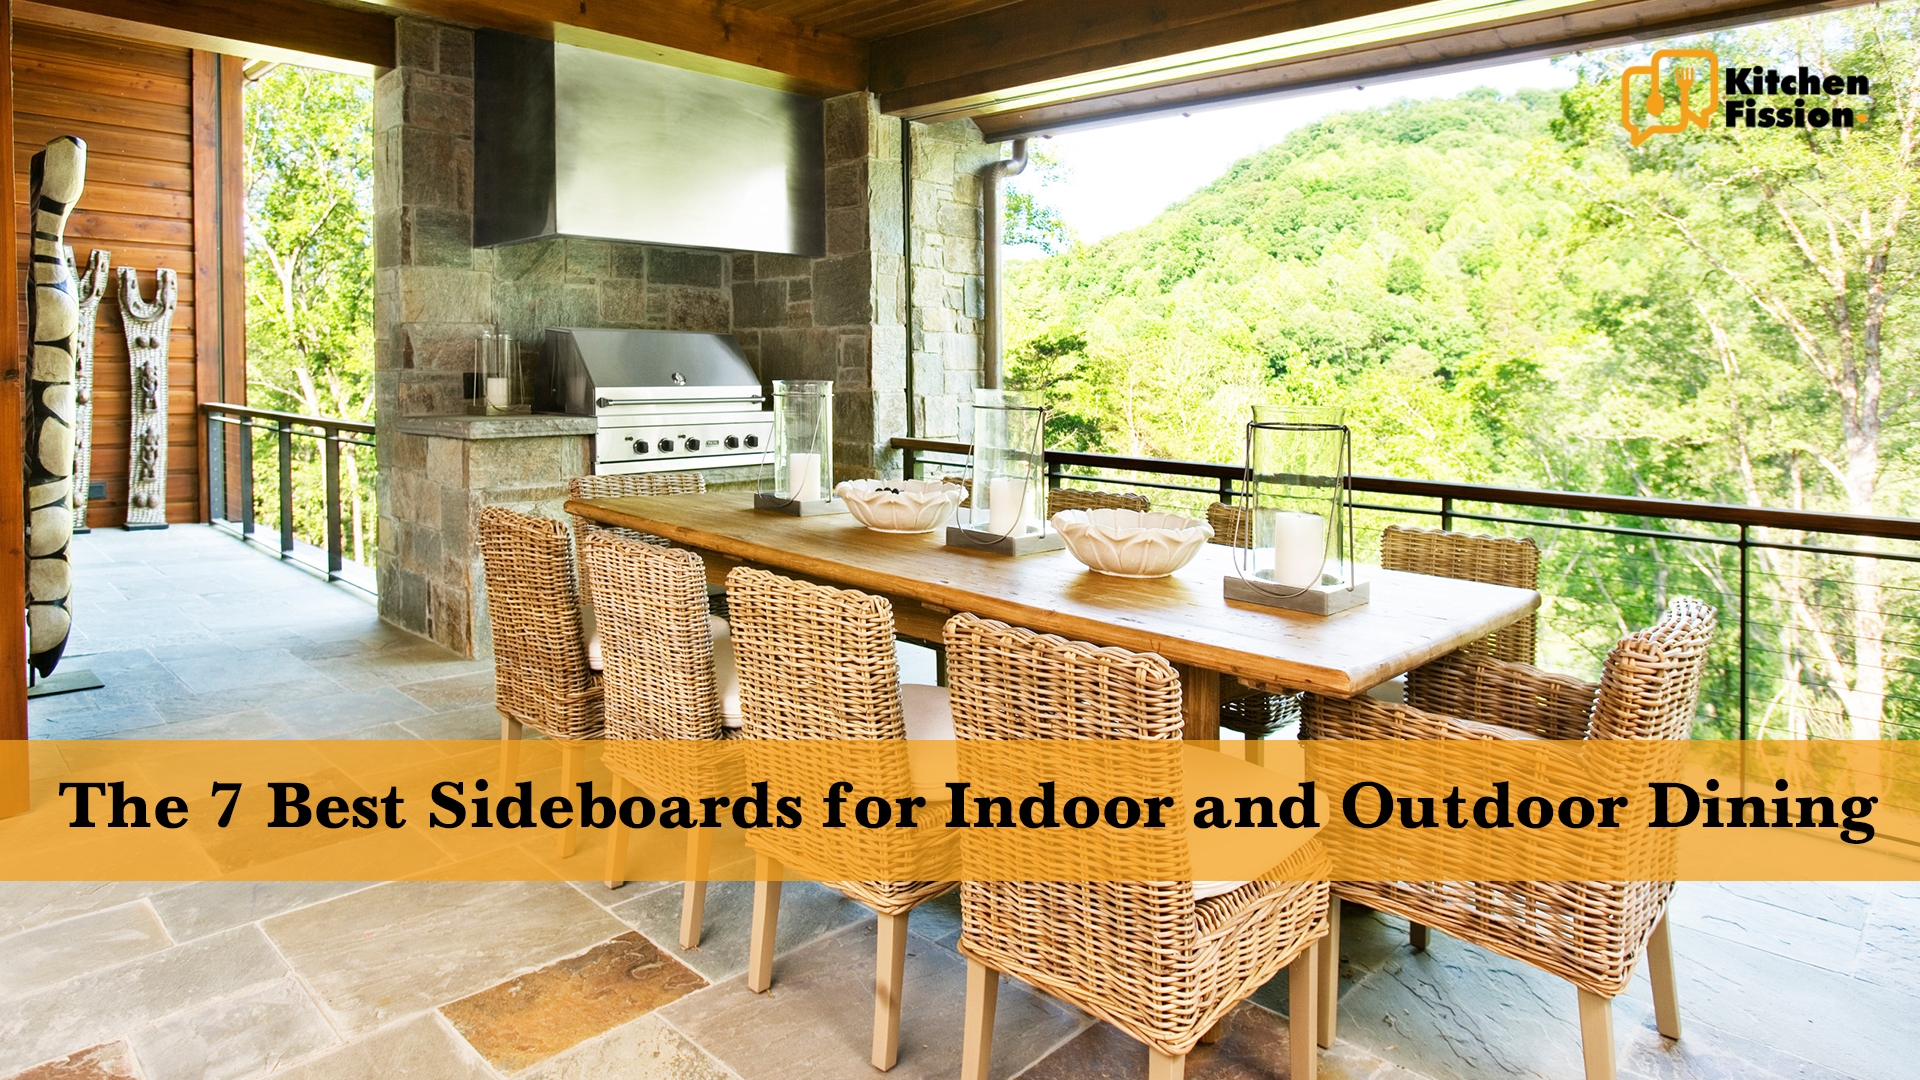 The 7 Best Sideboards for Indoor and Outdoor Dining